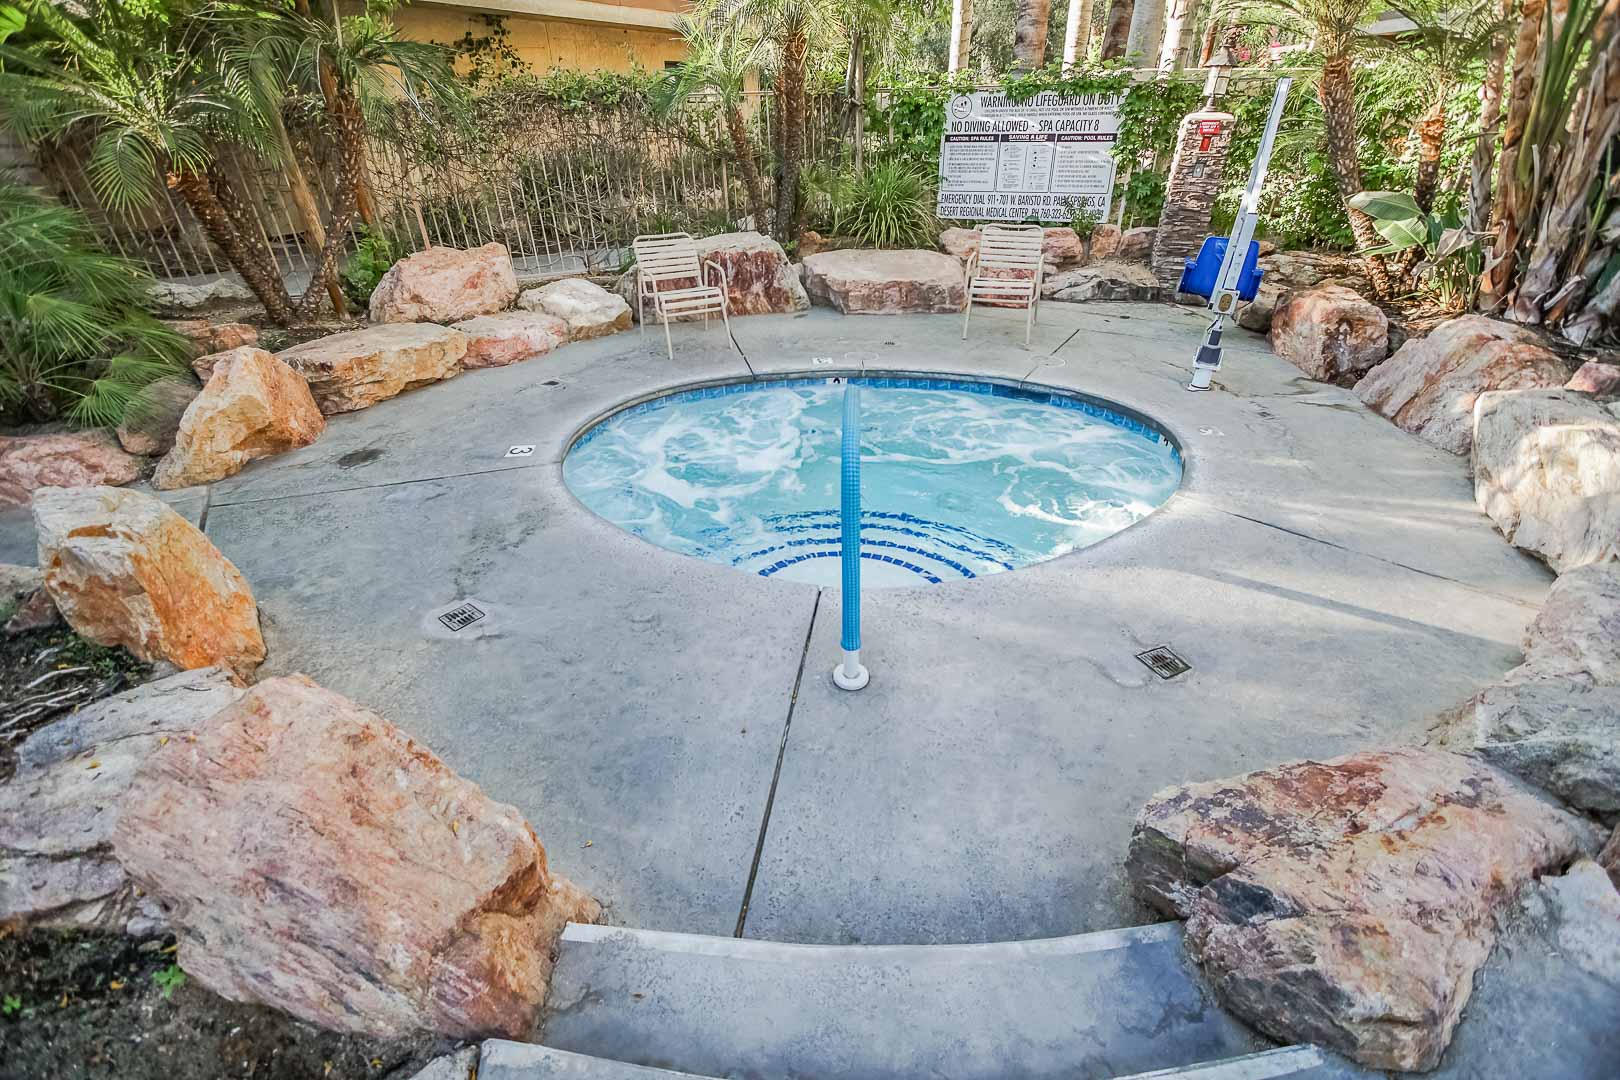 A peaceful outdoor Jacuzzi at VRI's Palm Springs Tennis Club in California.